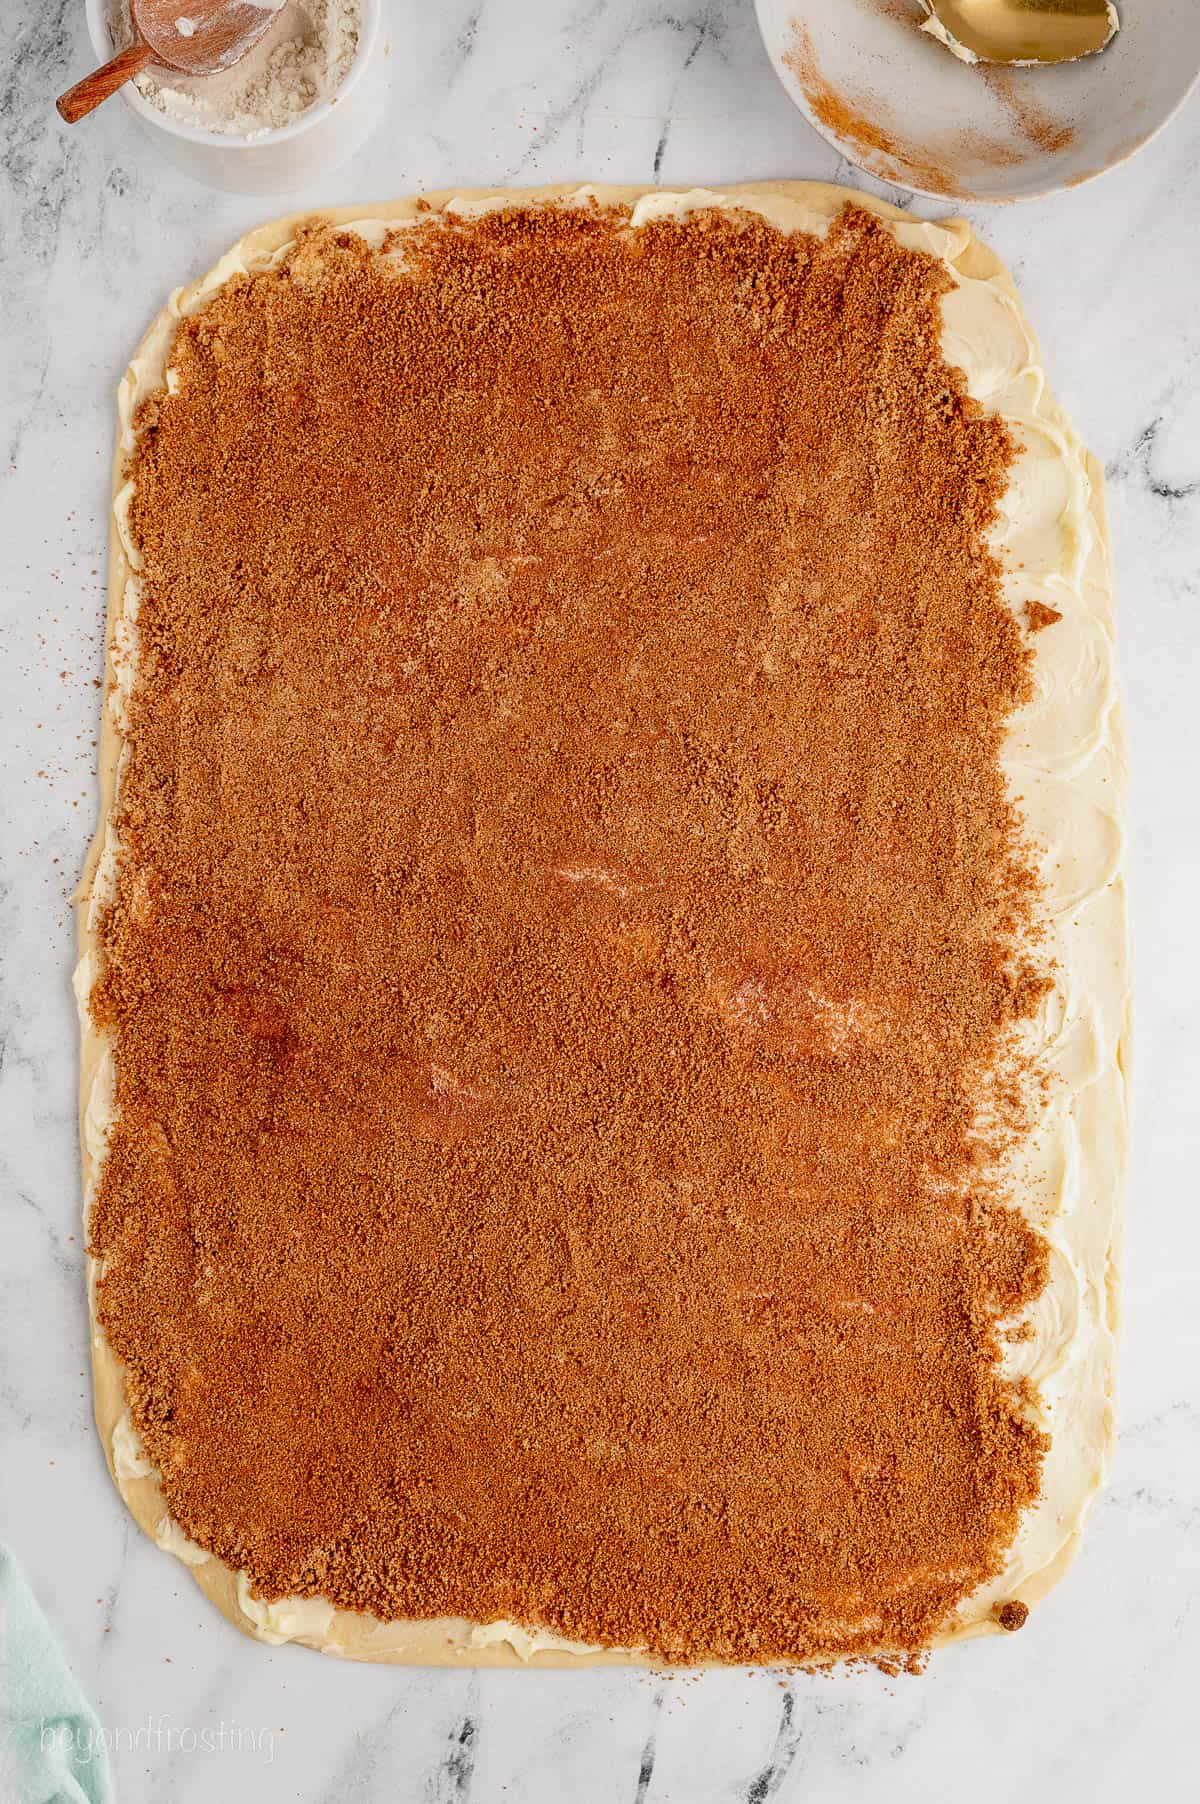 Cinnamon sugar spread over a large buttered dough rectangle.